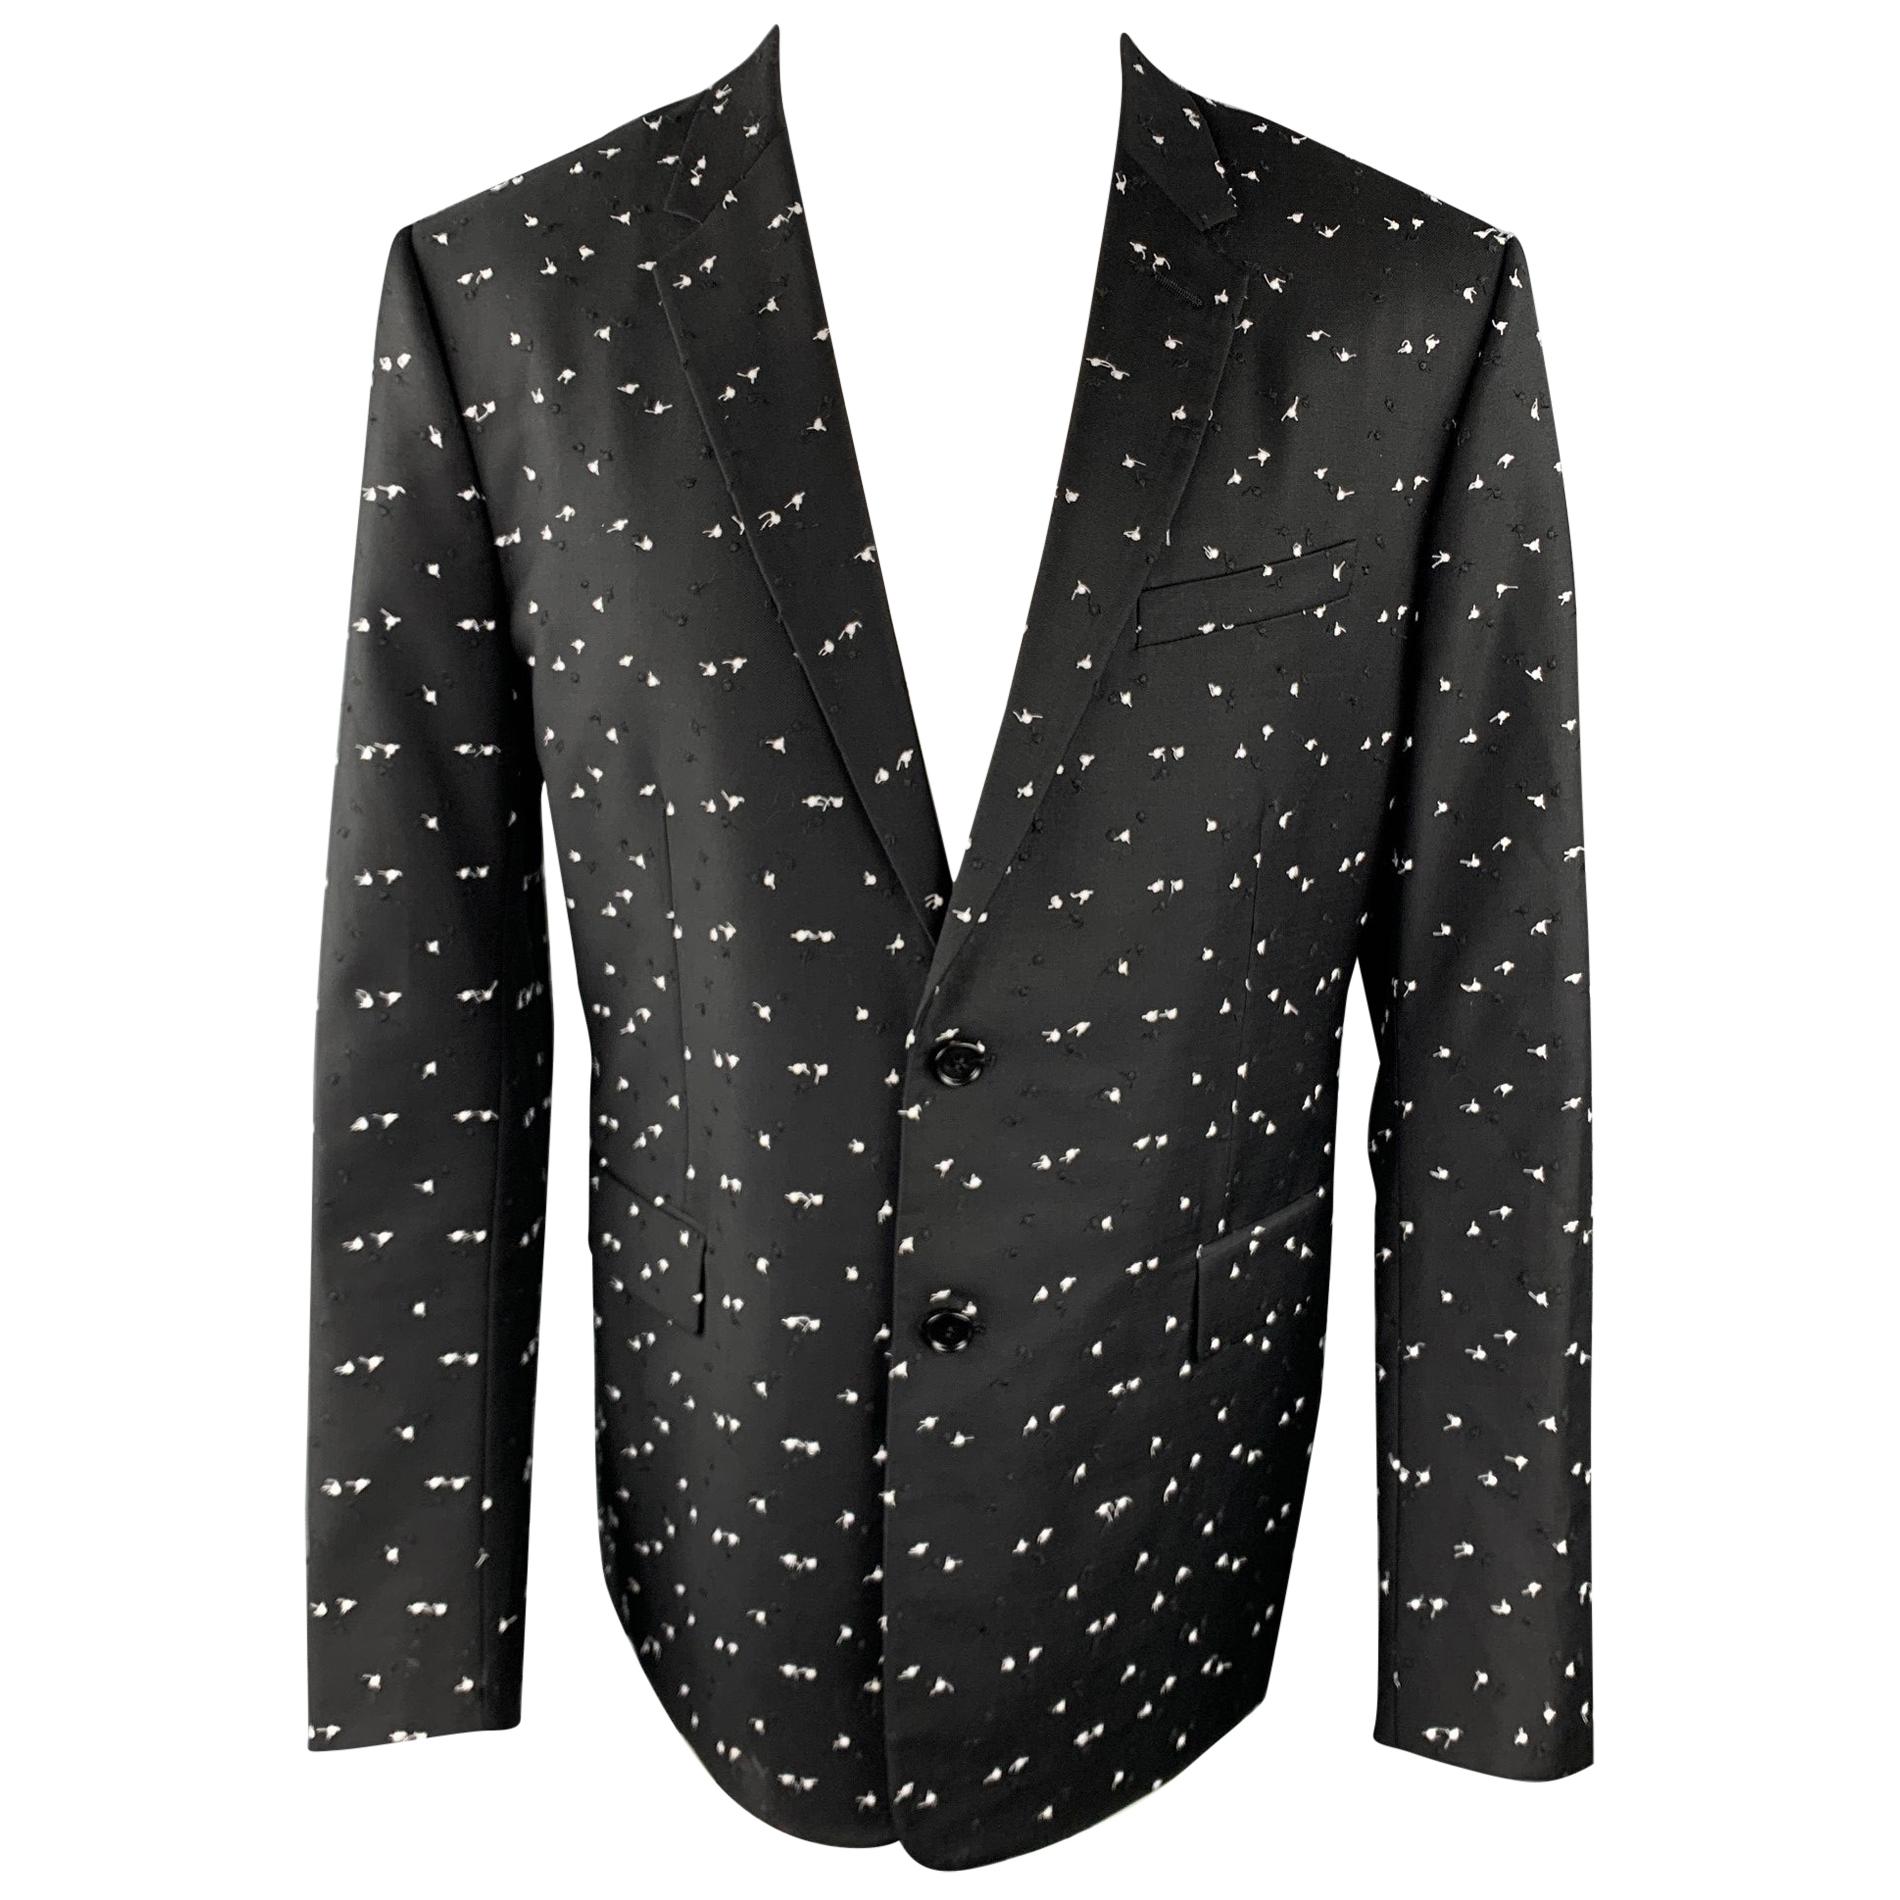 DIOR HOMME Pre-Fall 2017 Size 42 Black & White Textured Wool Sport Coat